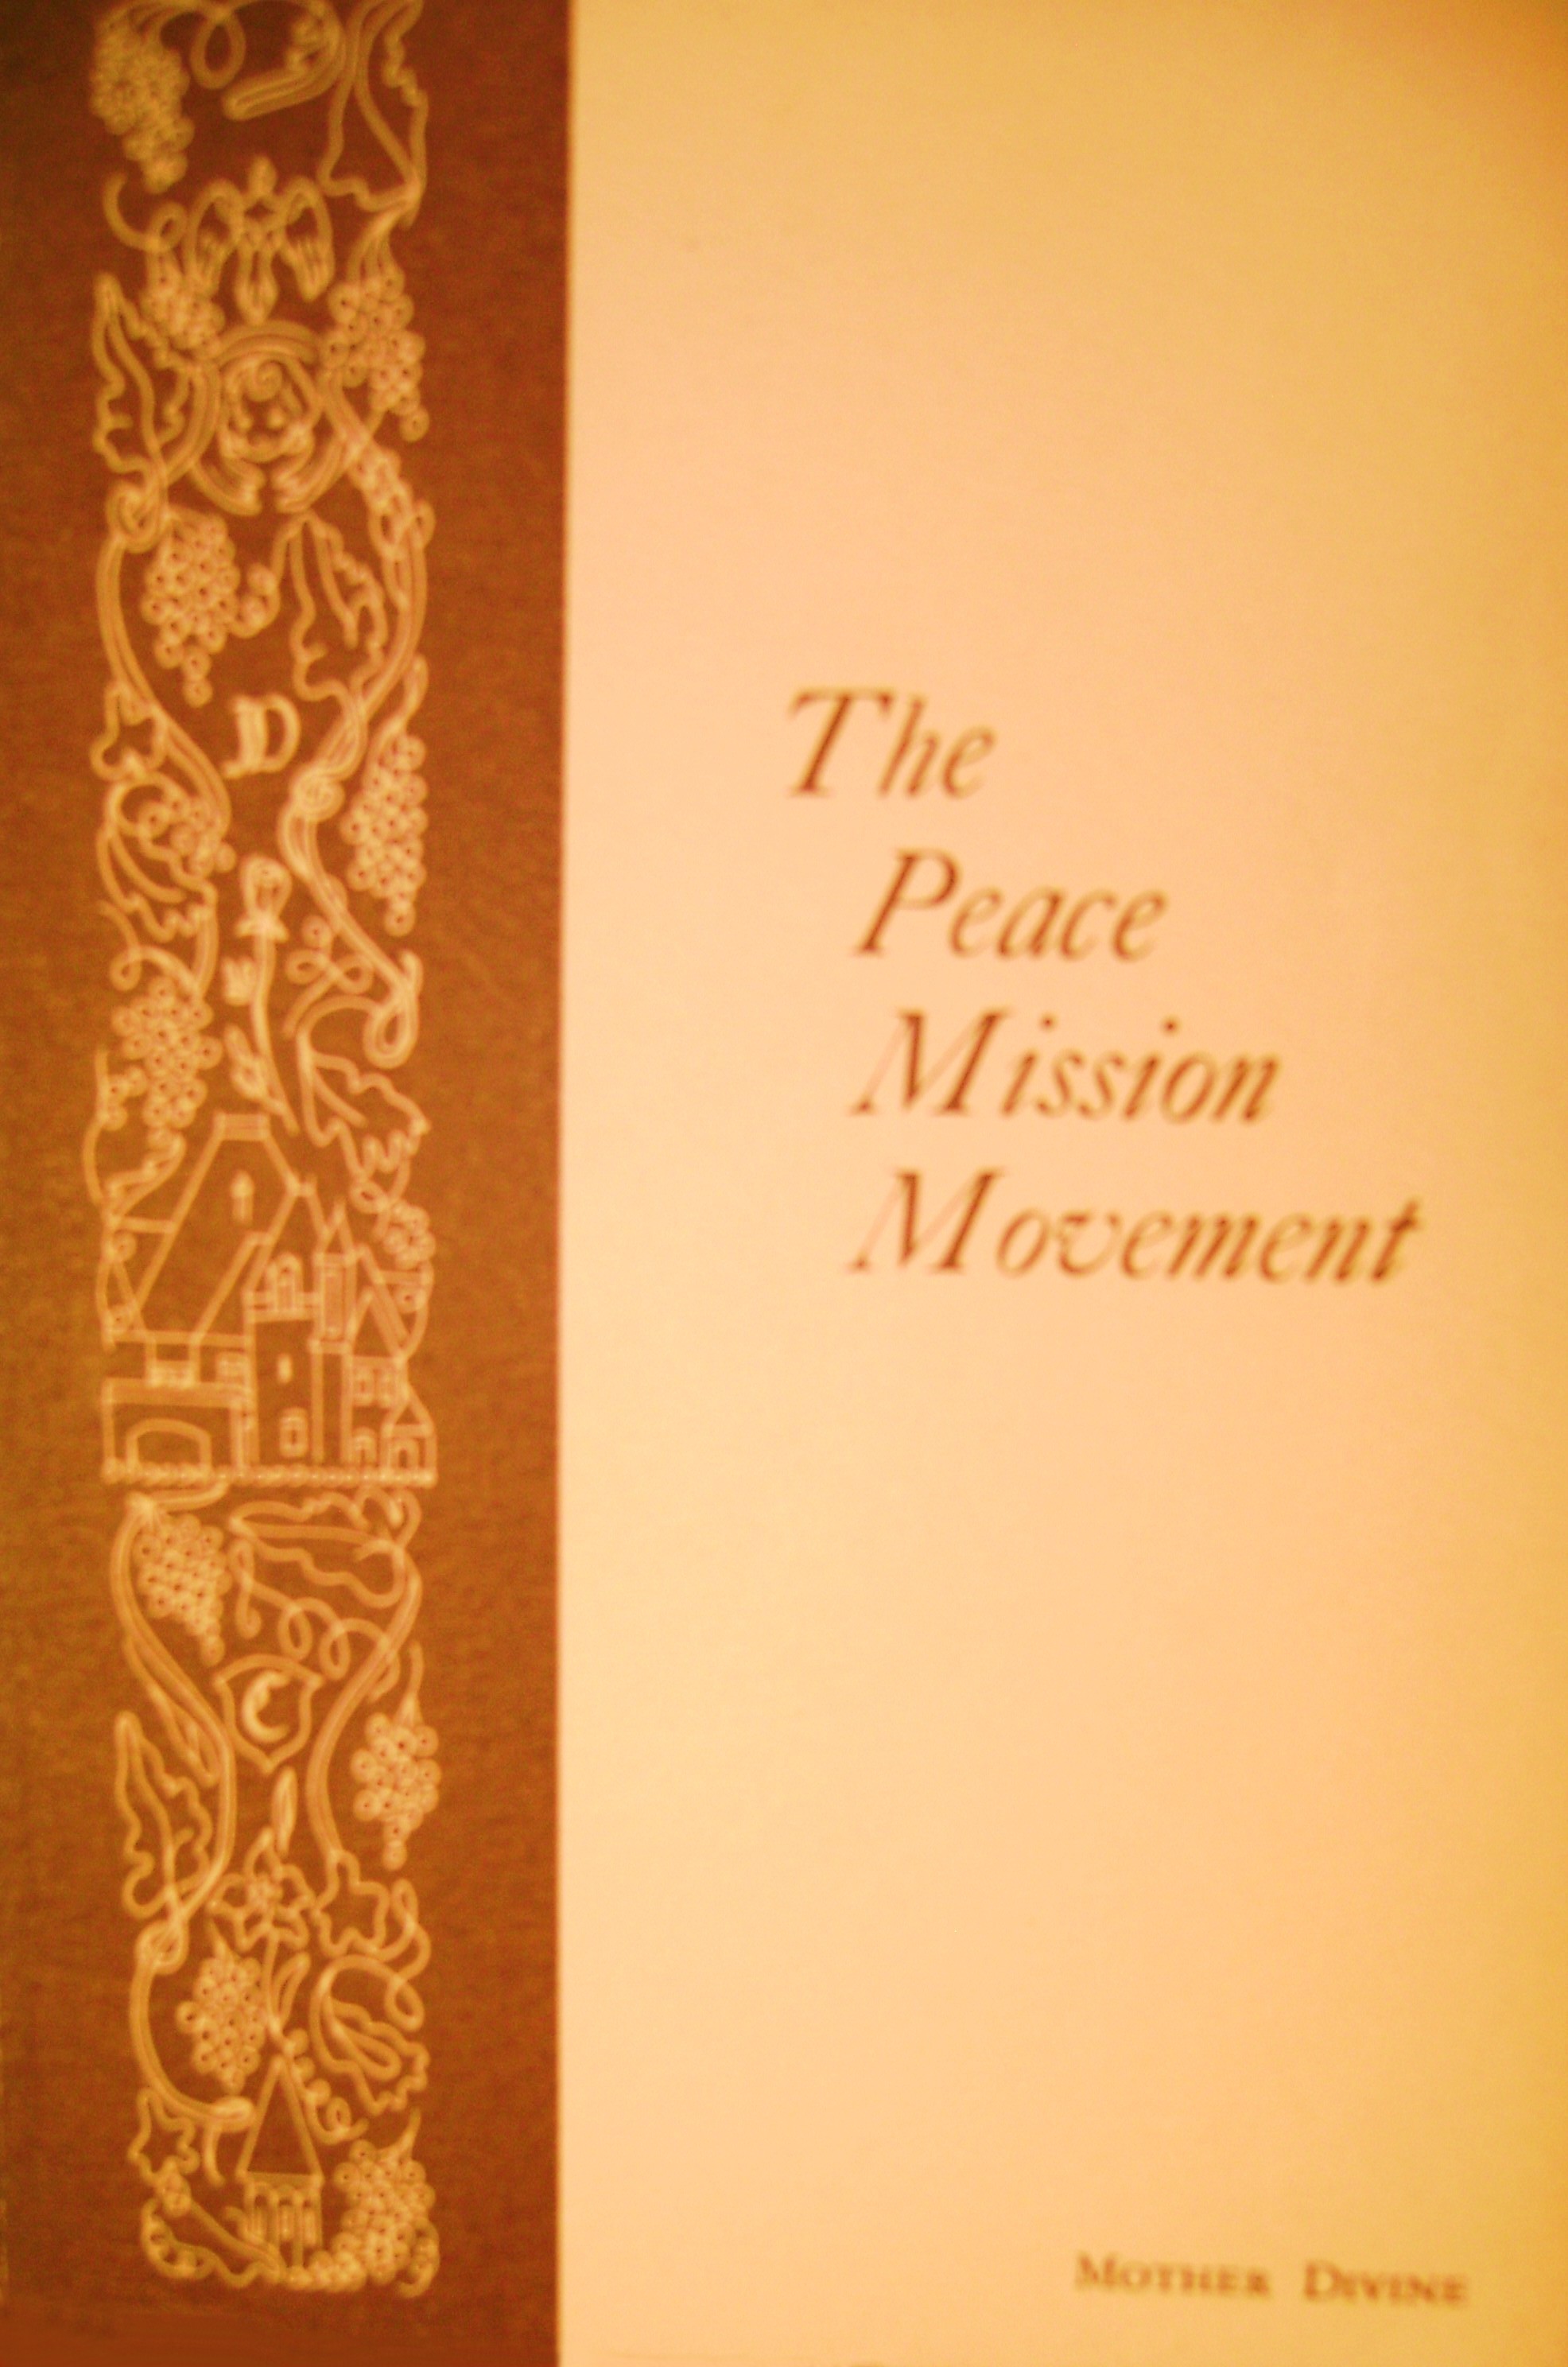 A photo of the cover of the book 'The  Peace Mission Movement'.